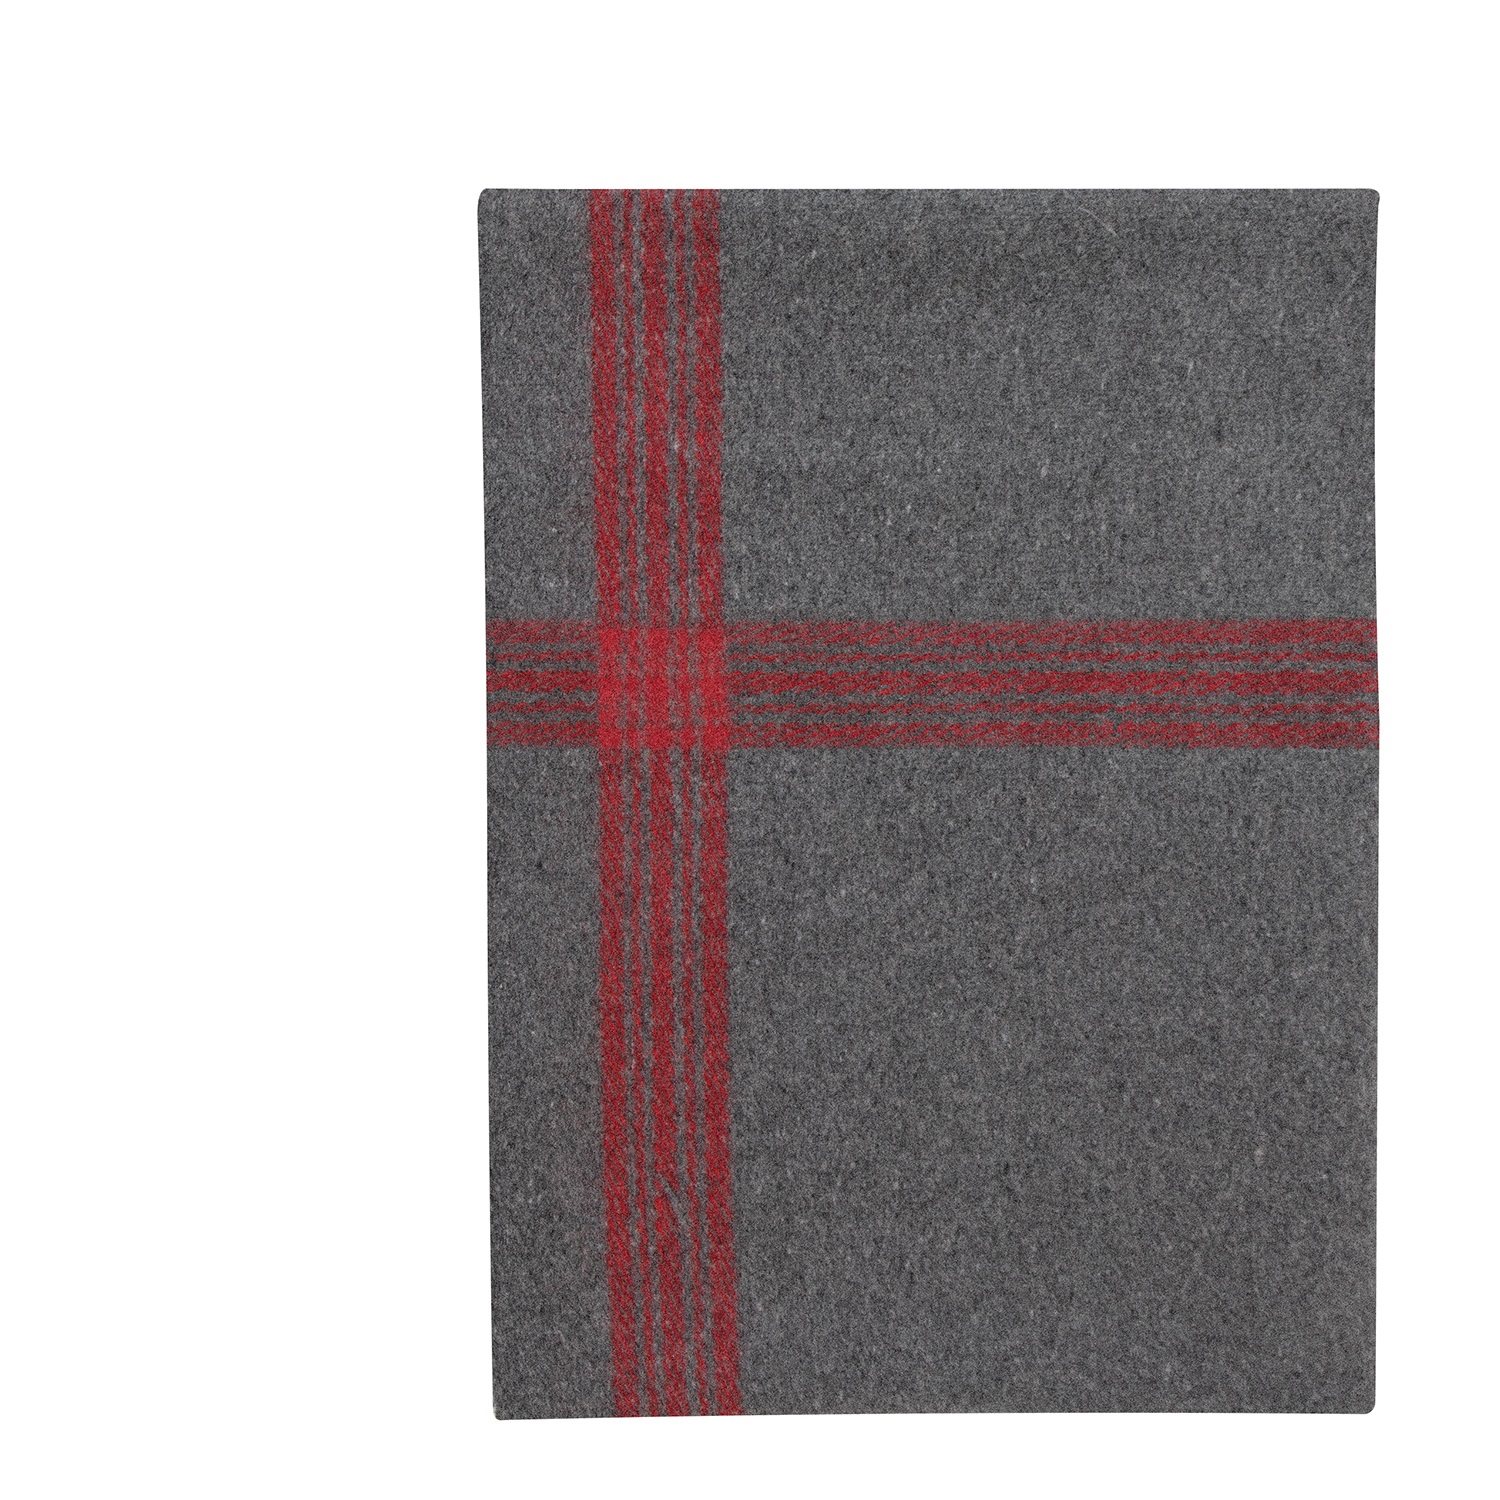 Striped Wool Blanket GREY/RED ROTHCO 1096 L-11